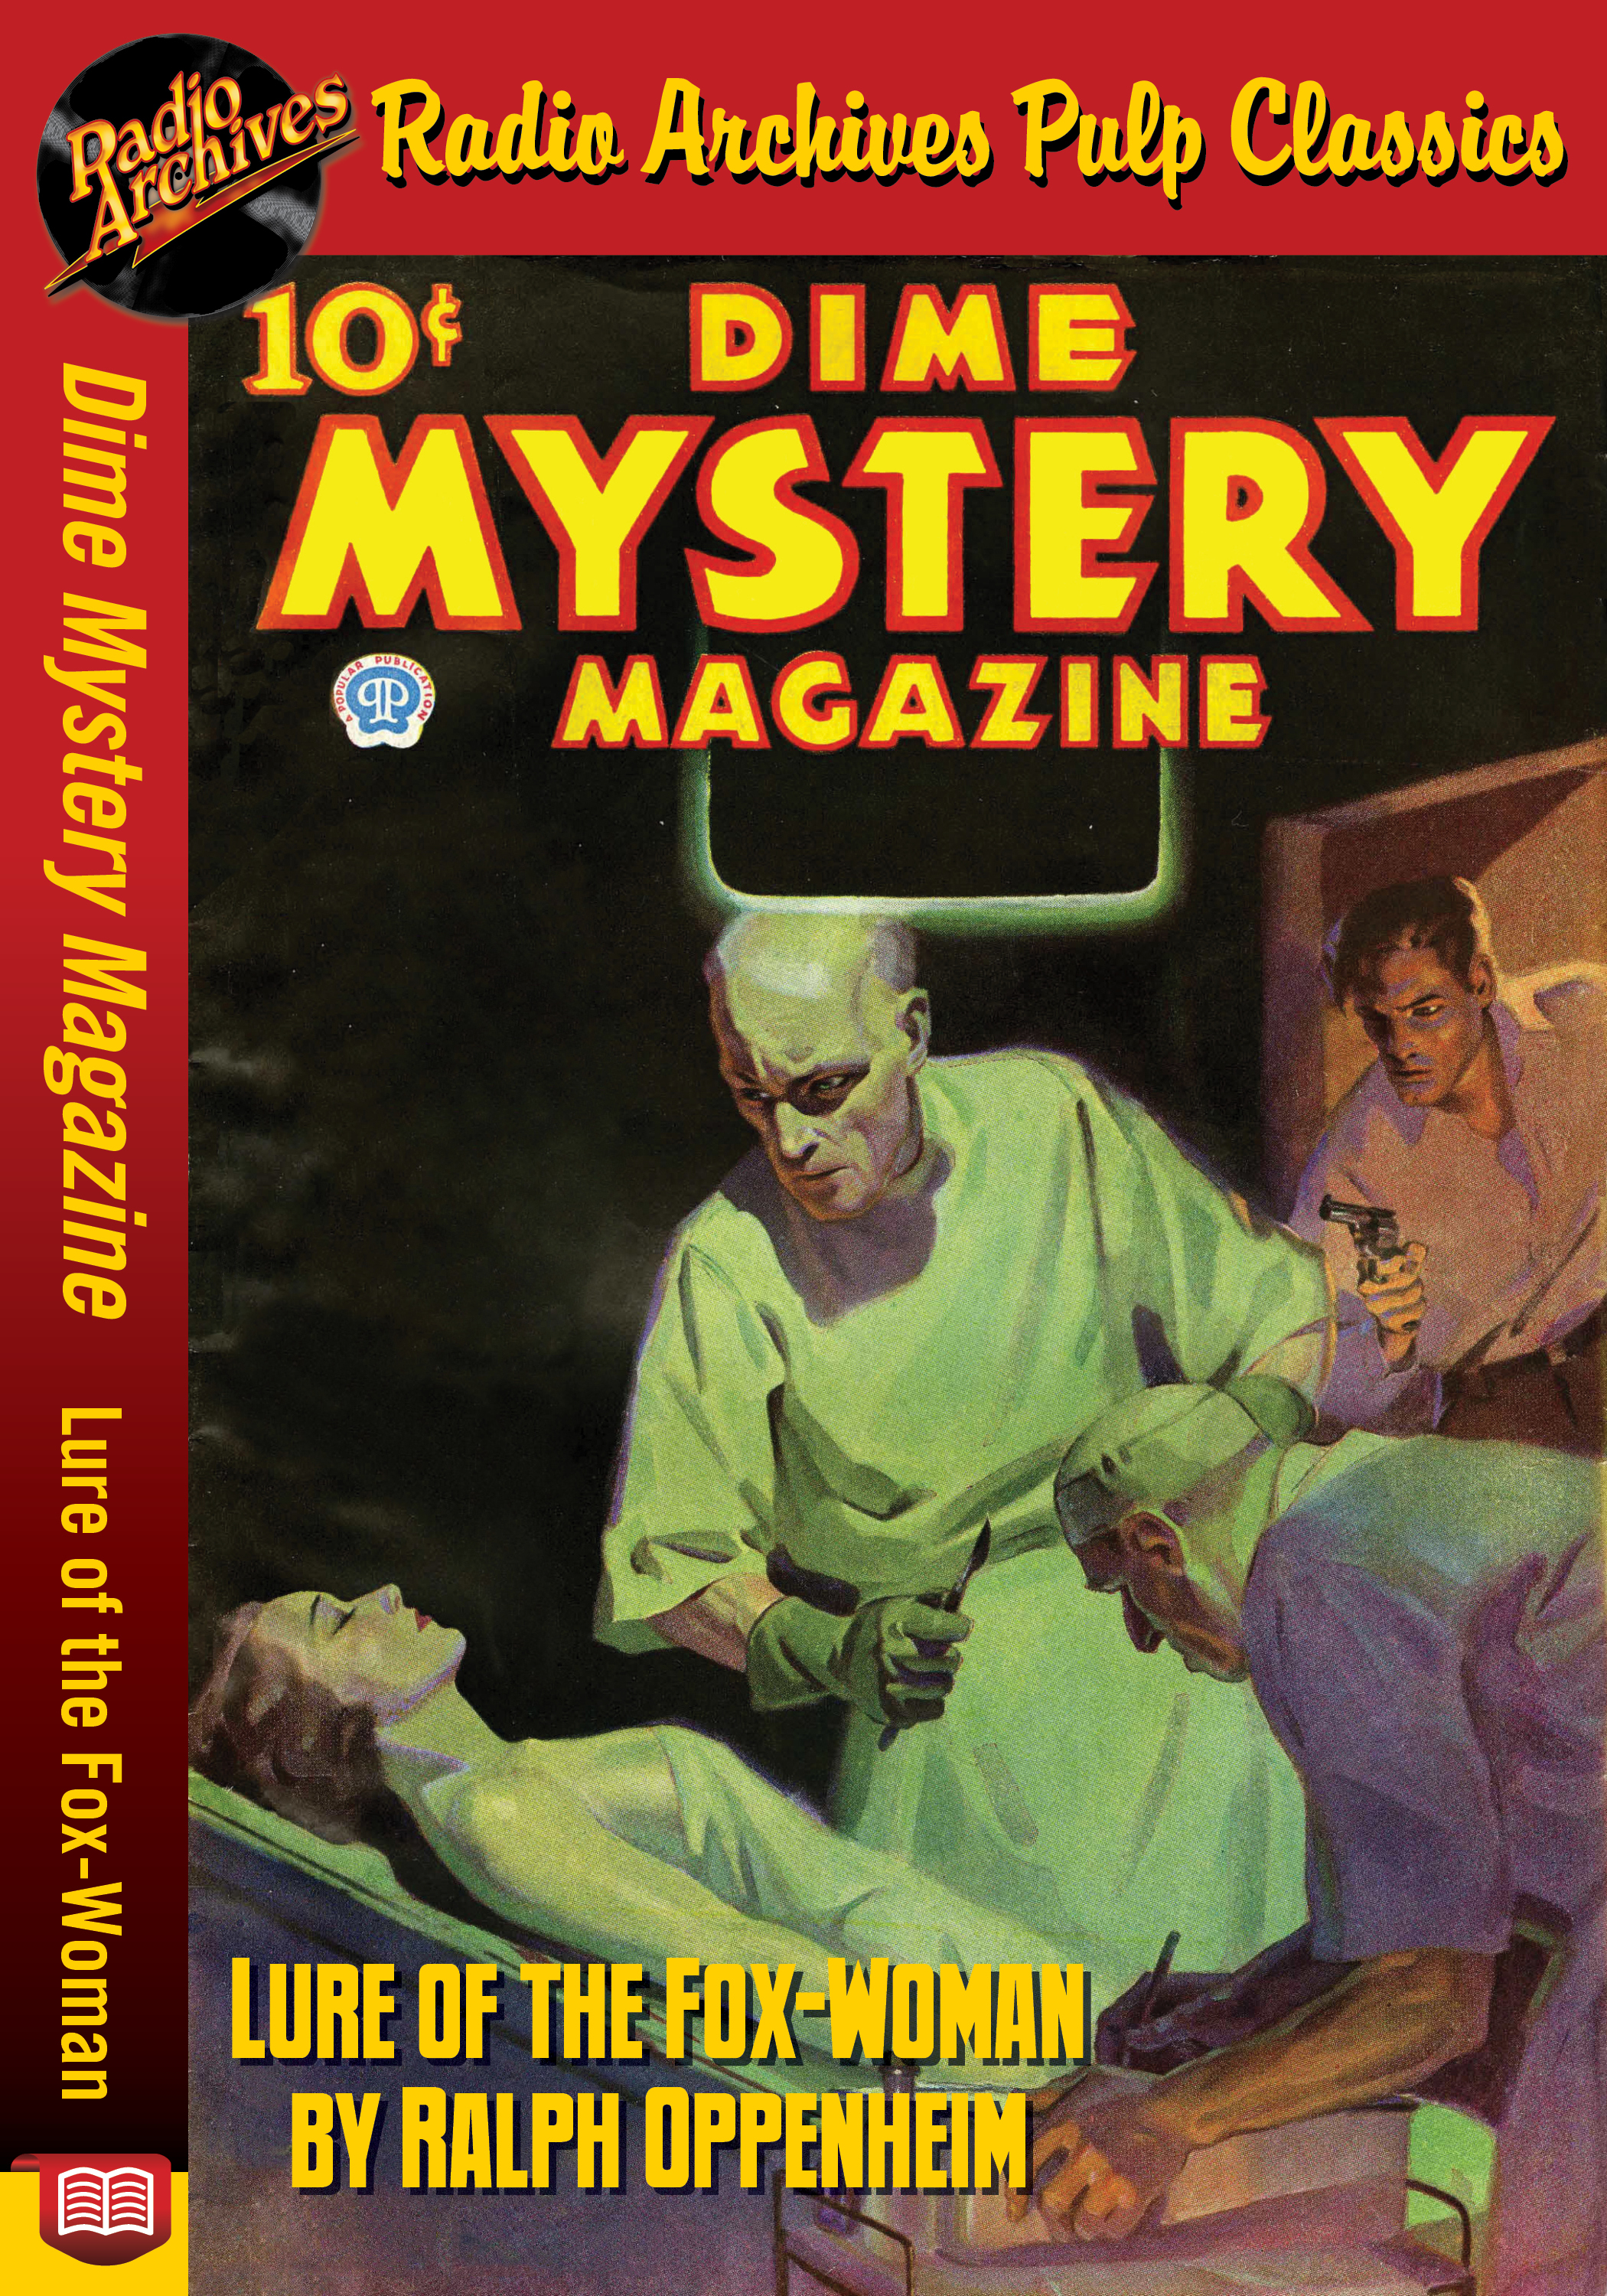 Dime Mystery Magazine - Lure of the by: Ralph Oppenheim